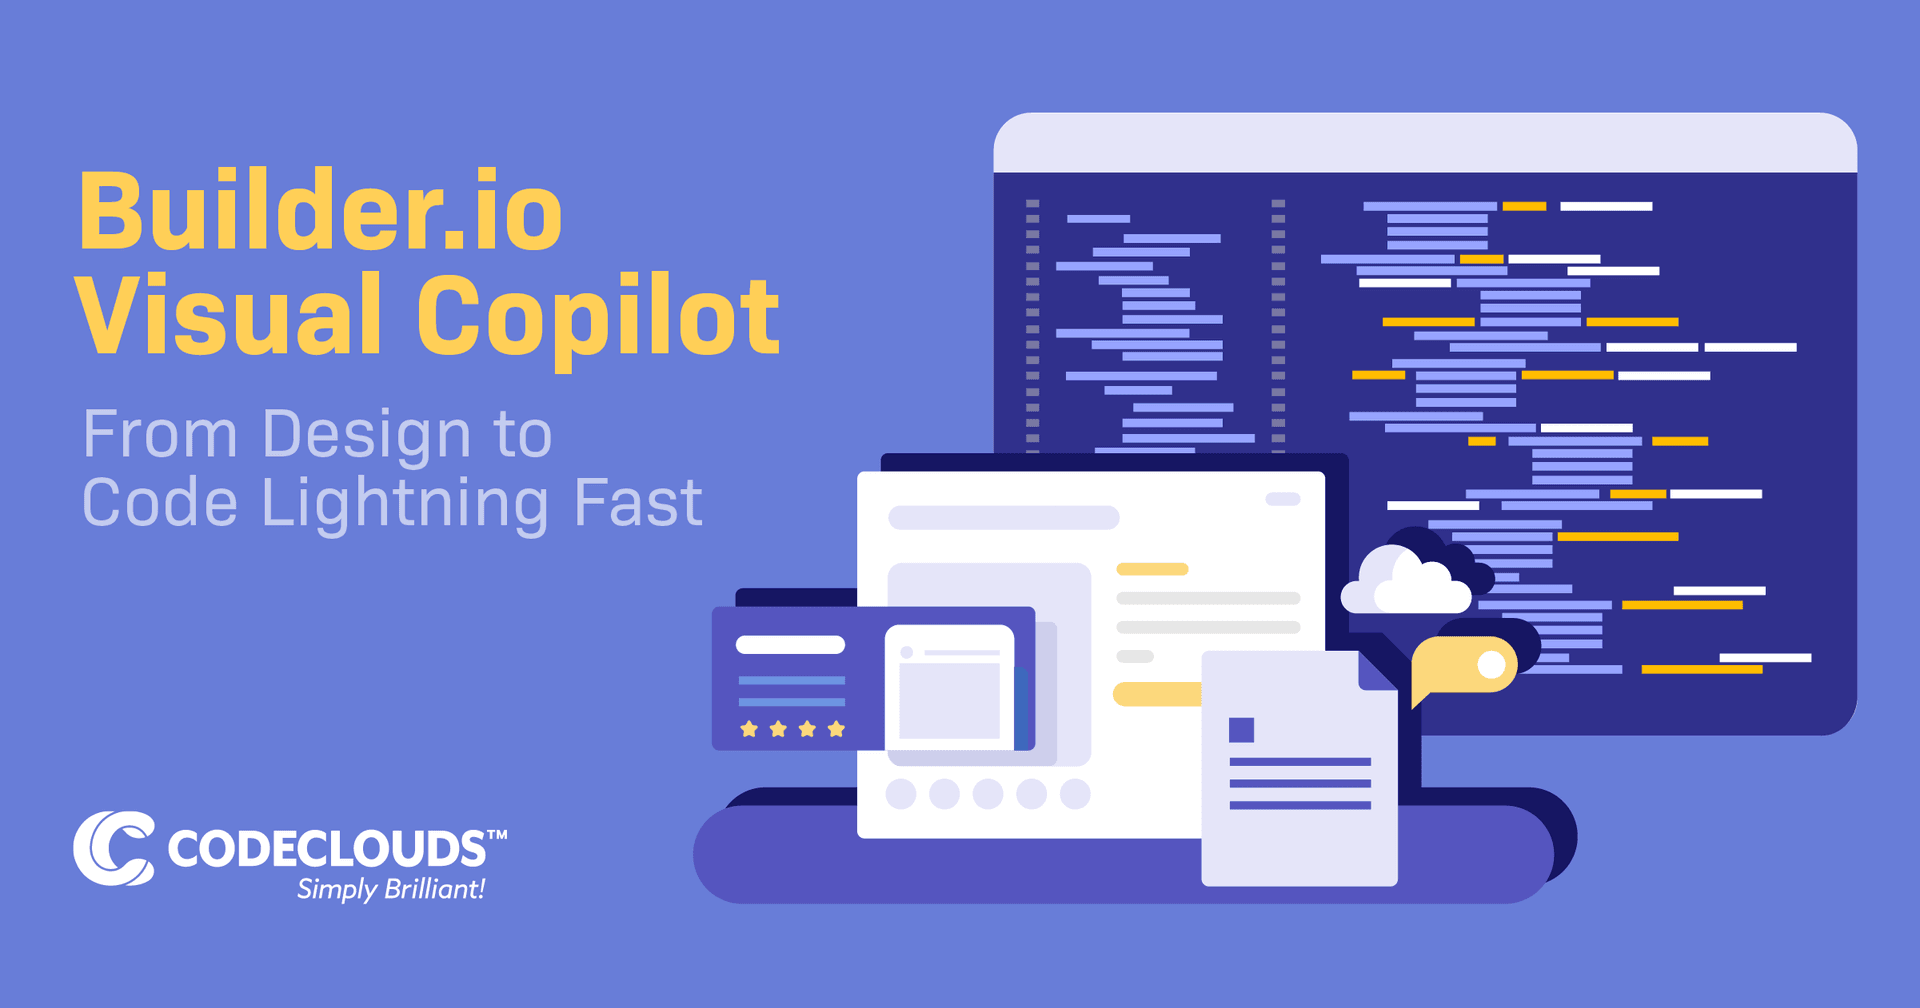 Builder.io Visual Copilot: From Design to Code Lightning Fast